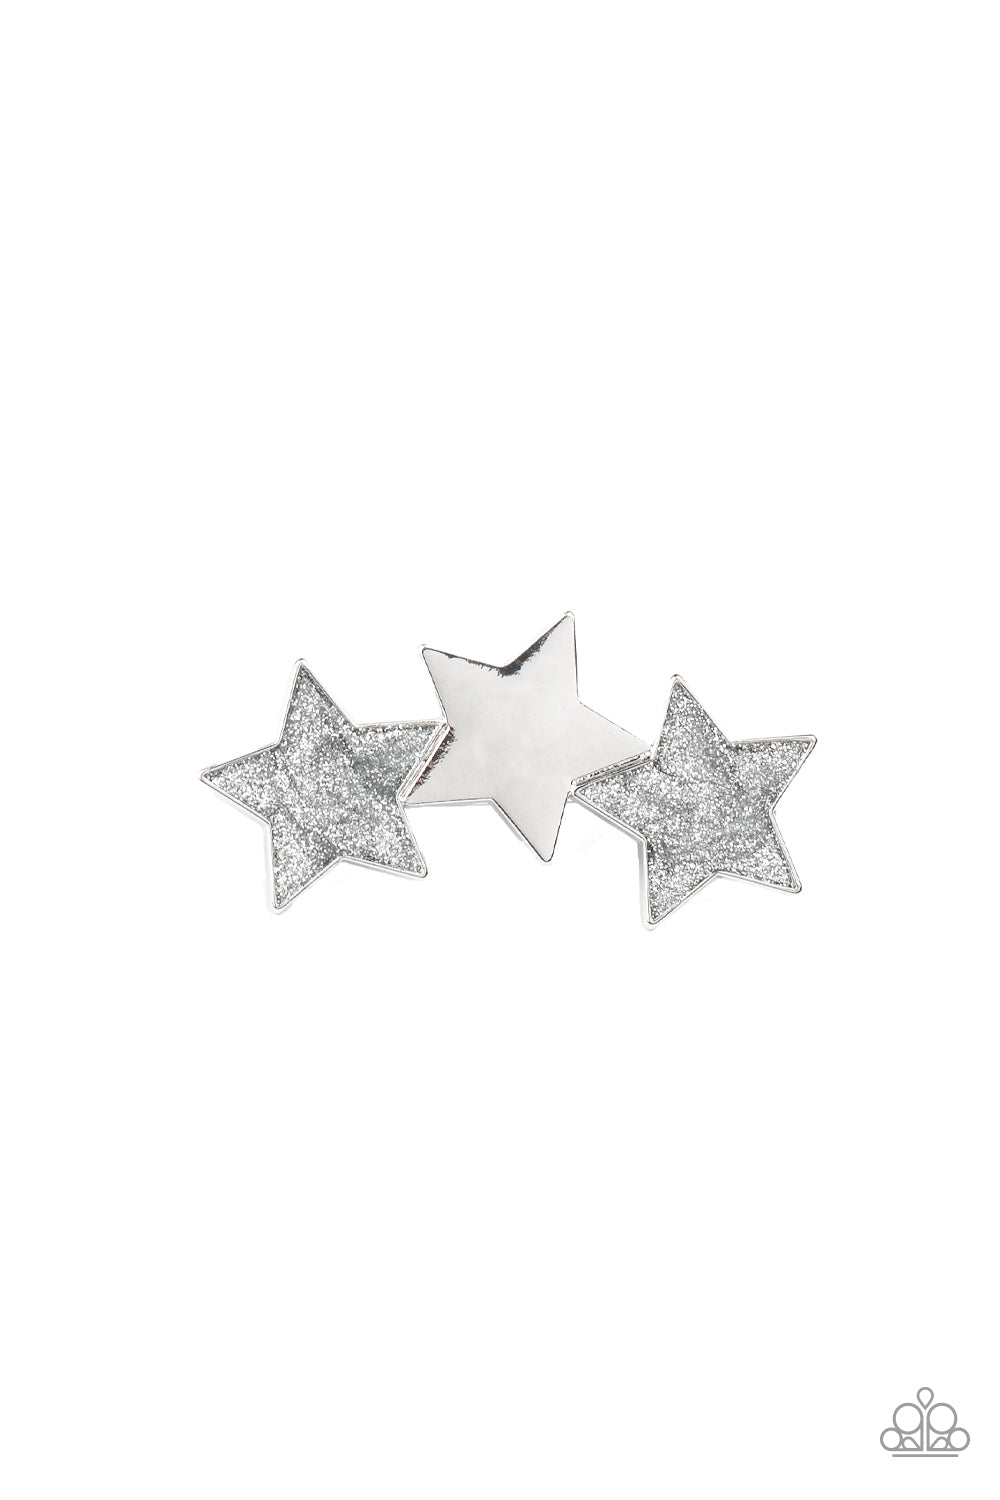 Paparazzi - Dont Get Me STAR-ted!- Silver Hair Clip